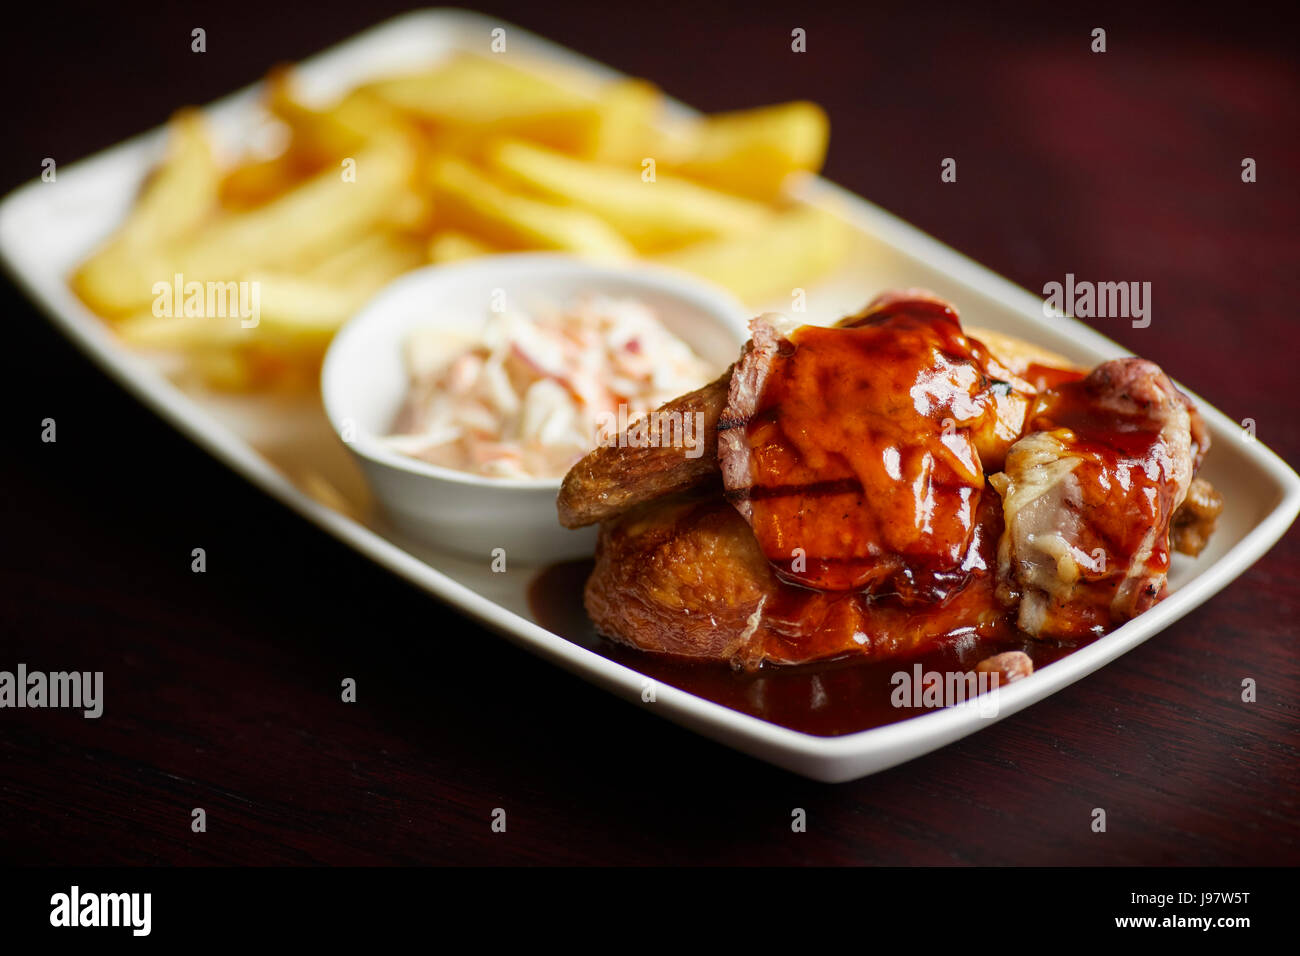 Traditional pub food, chicken in sauce and chips. Stock Photo